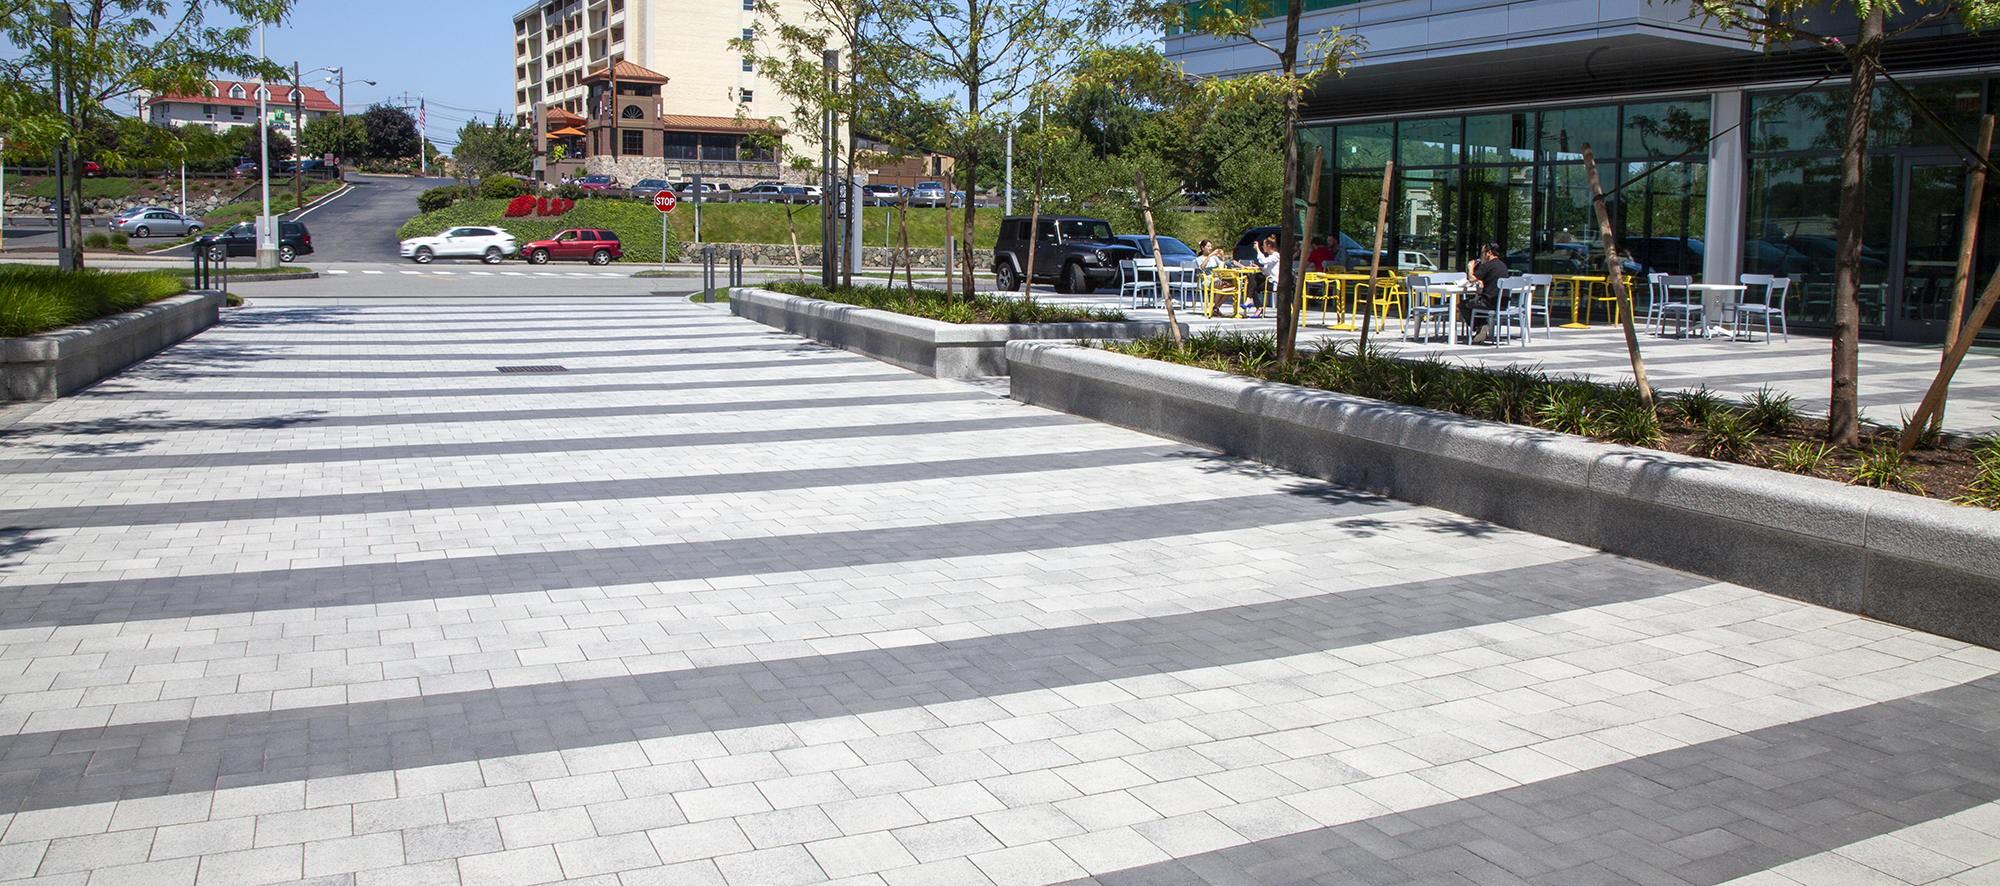 A striped pedestrian path made with contrasting shades of Umbriano pavers is bordered by a roadway and businesses with outdoor seating.